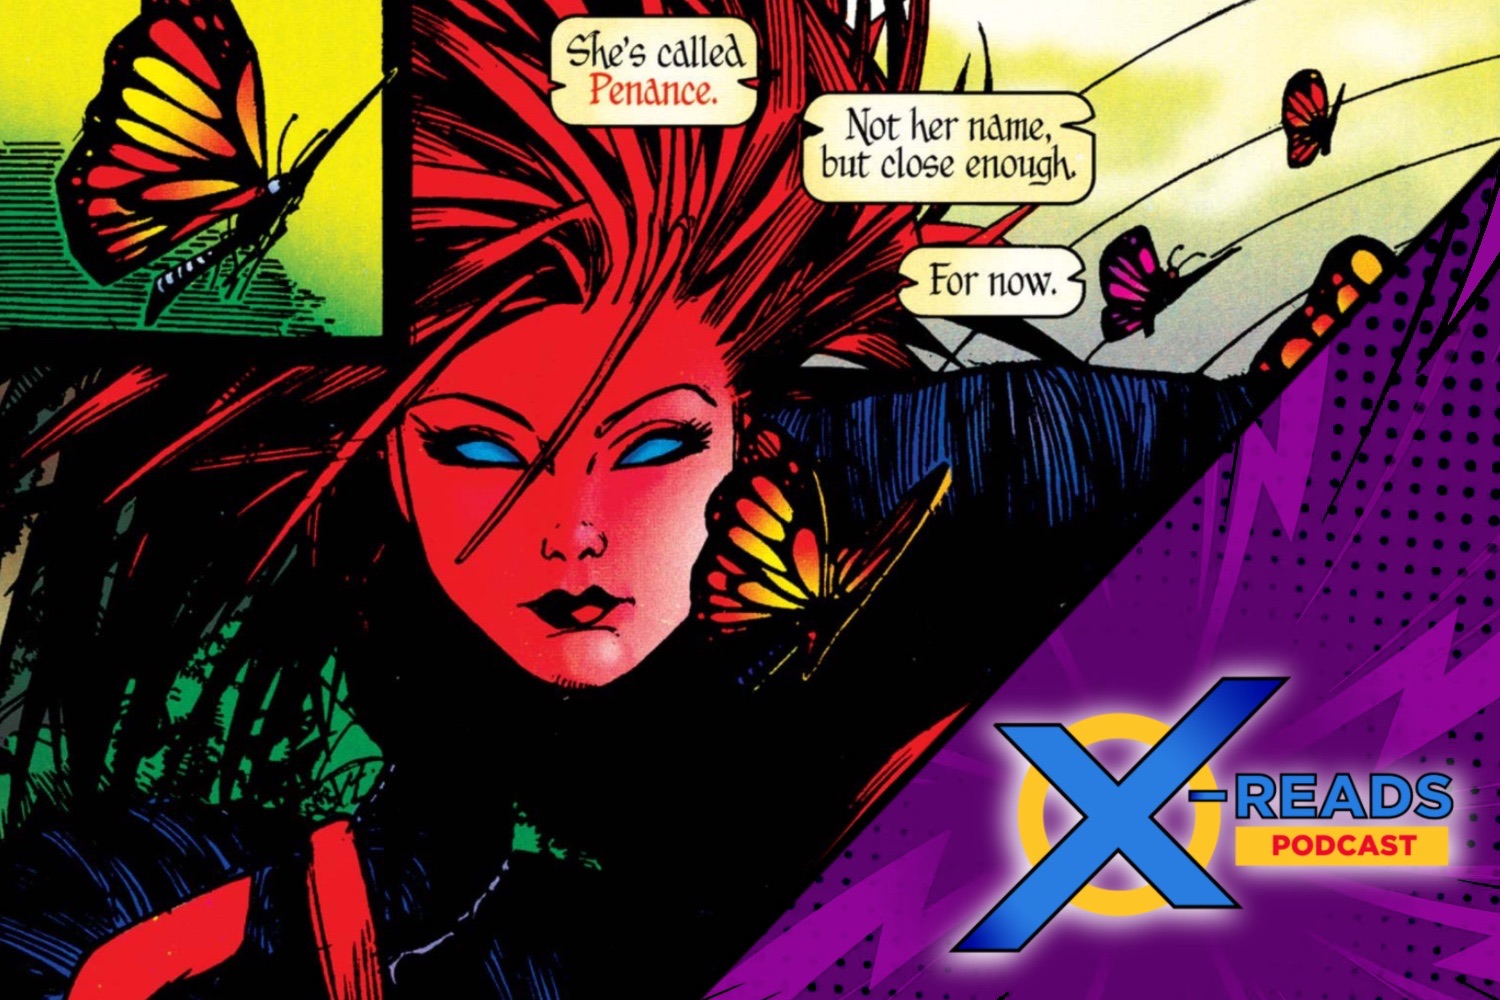 X-Reads Podcast Episode 114: Generation X #4 Holiday Spectacular, X-MAS: A Merry Mutant Musical! w/ special guest Sarah Mucek